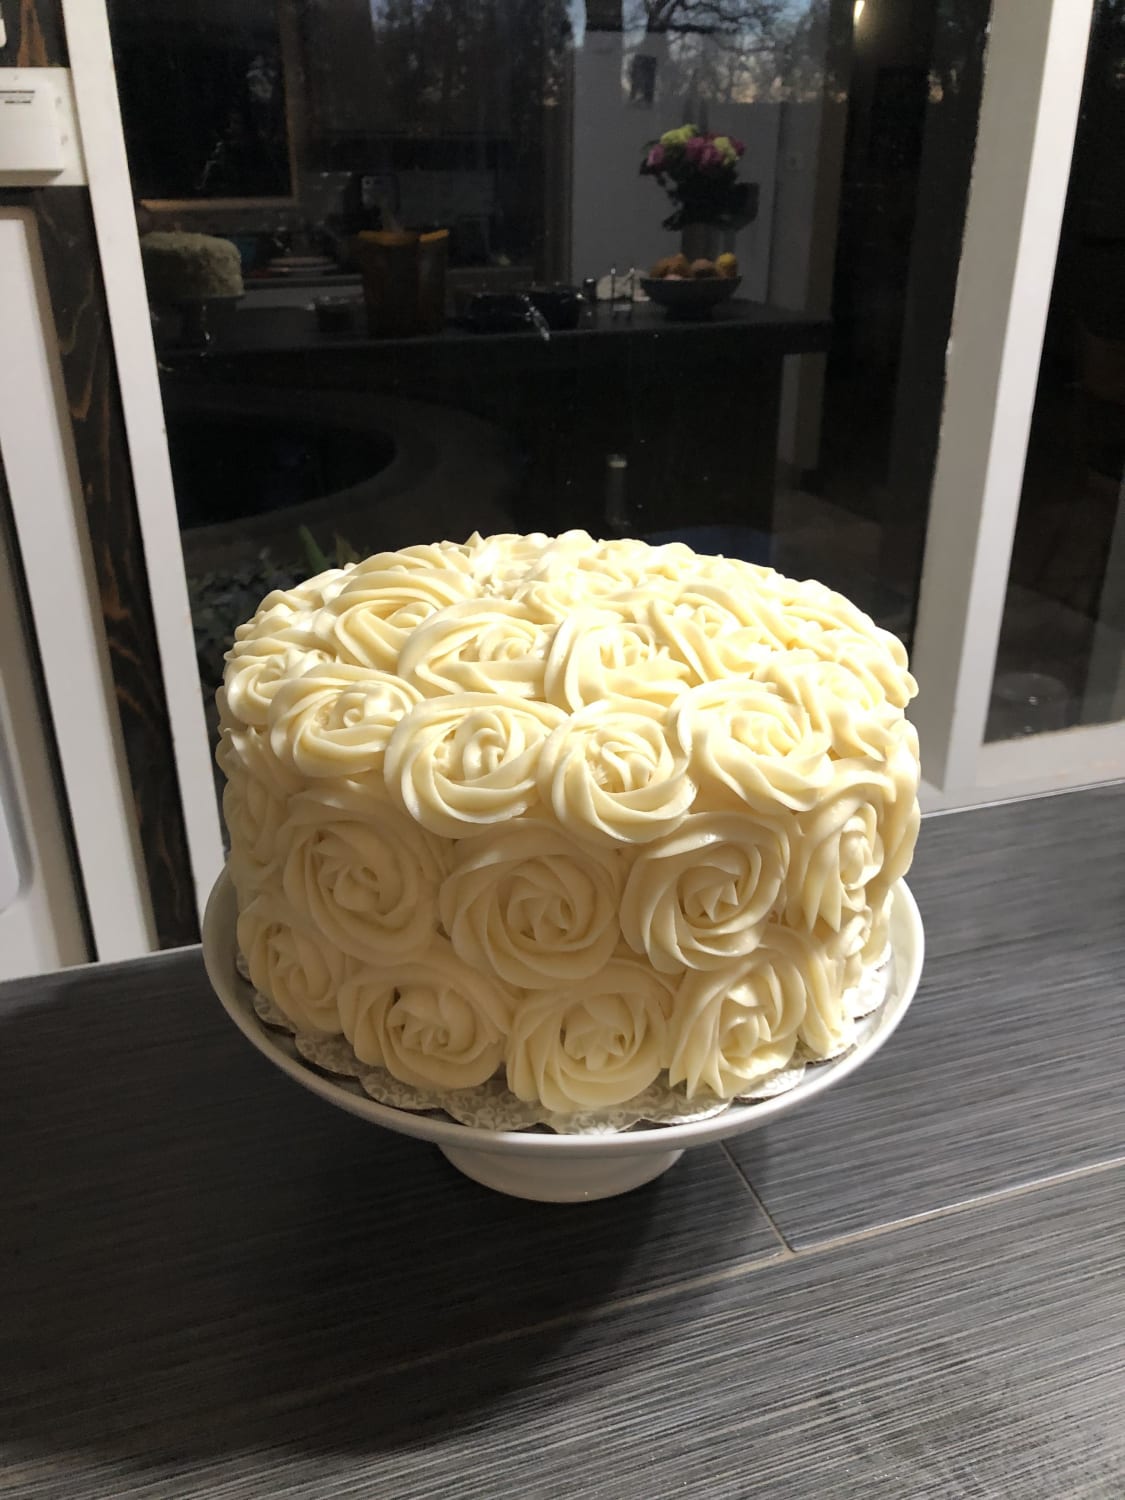 Red velvet cake with cream cheese frosting rosettes to celebrate my daughter graduating from high school